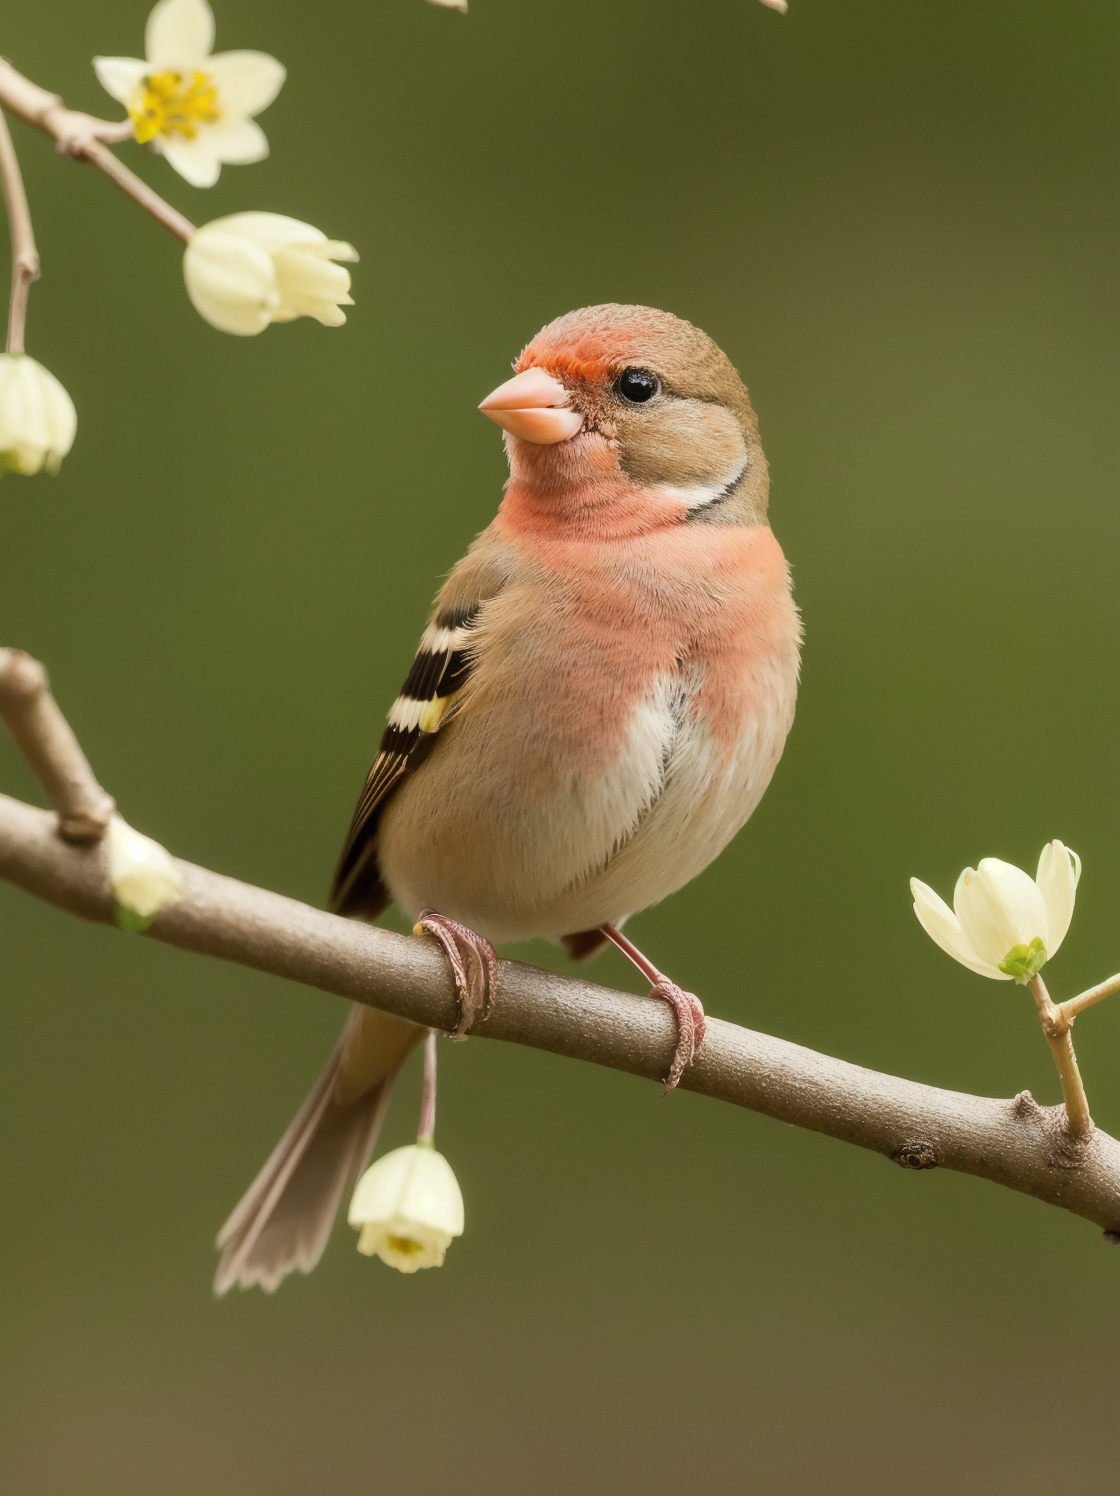 a photograph of a tiny finch on a branch with spring flowers on background